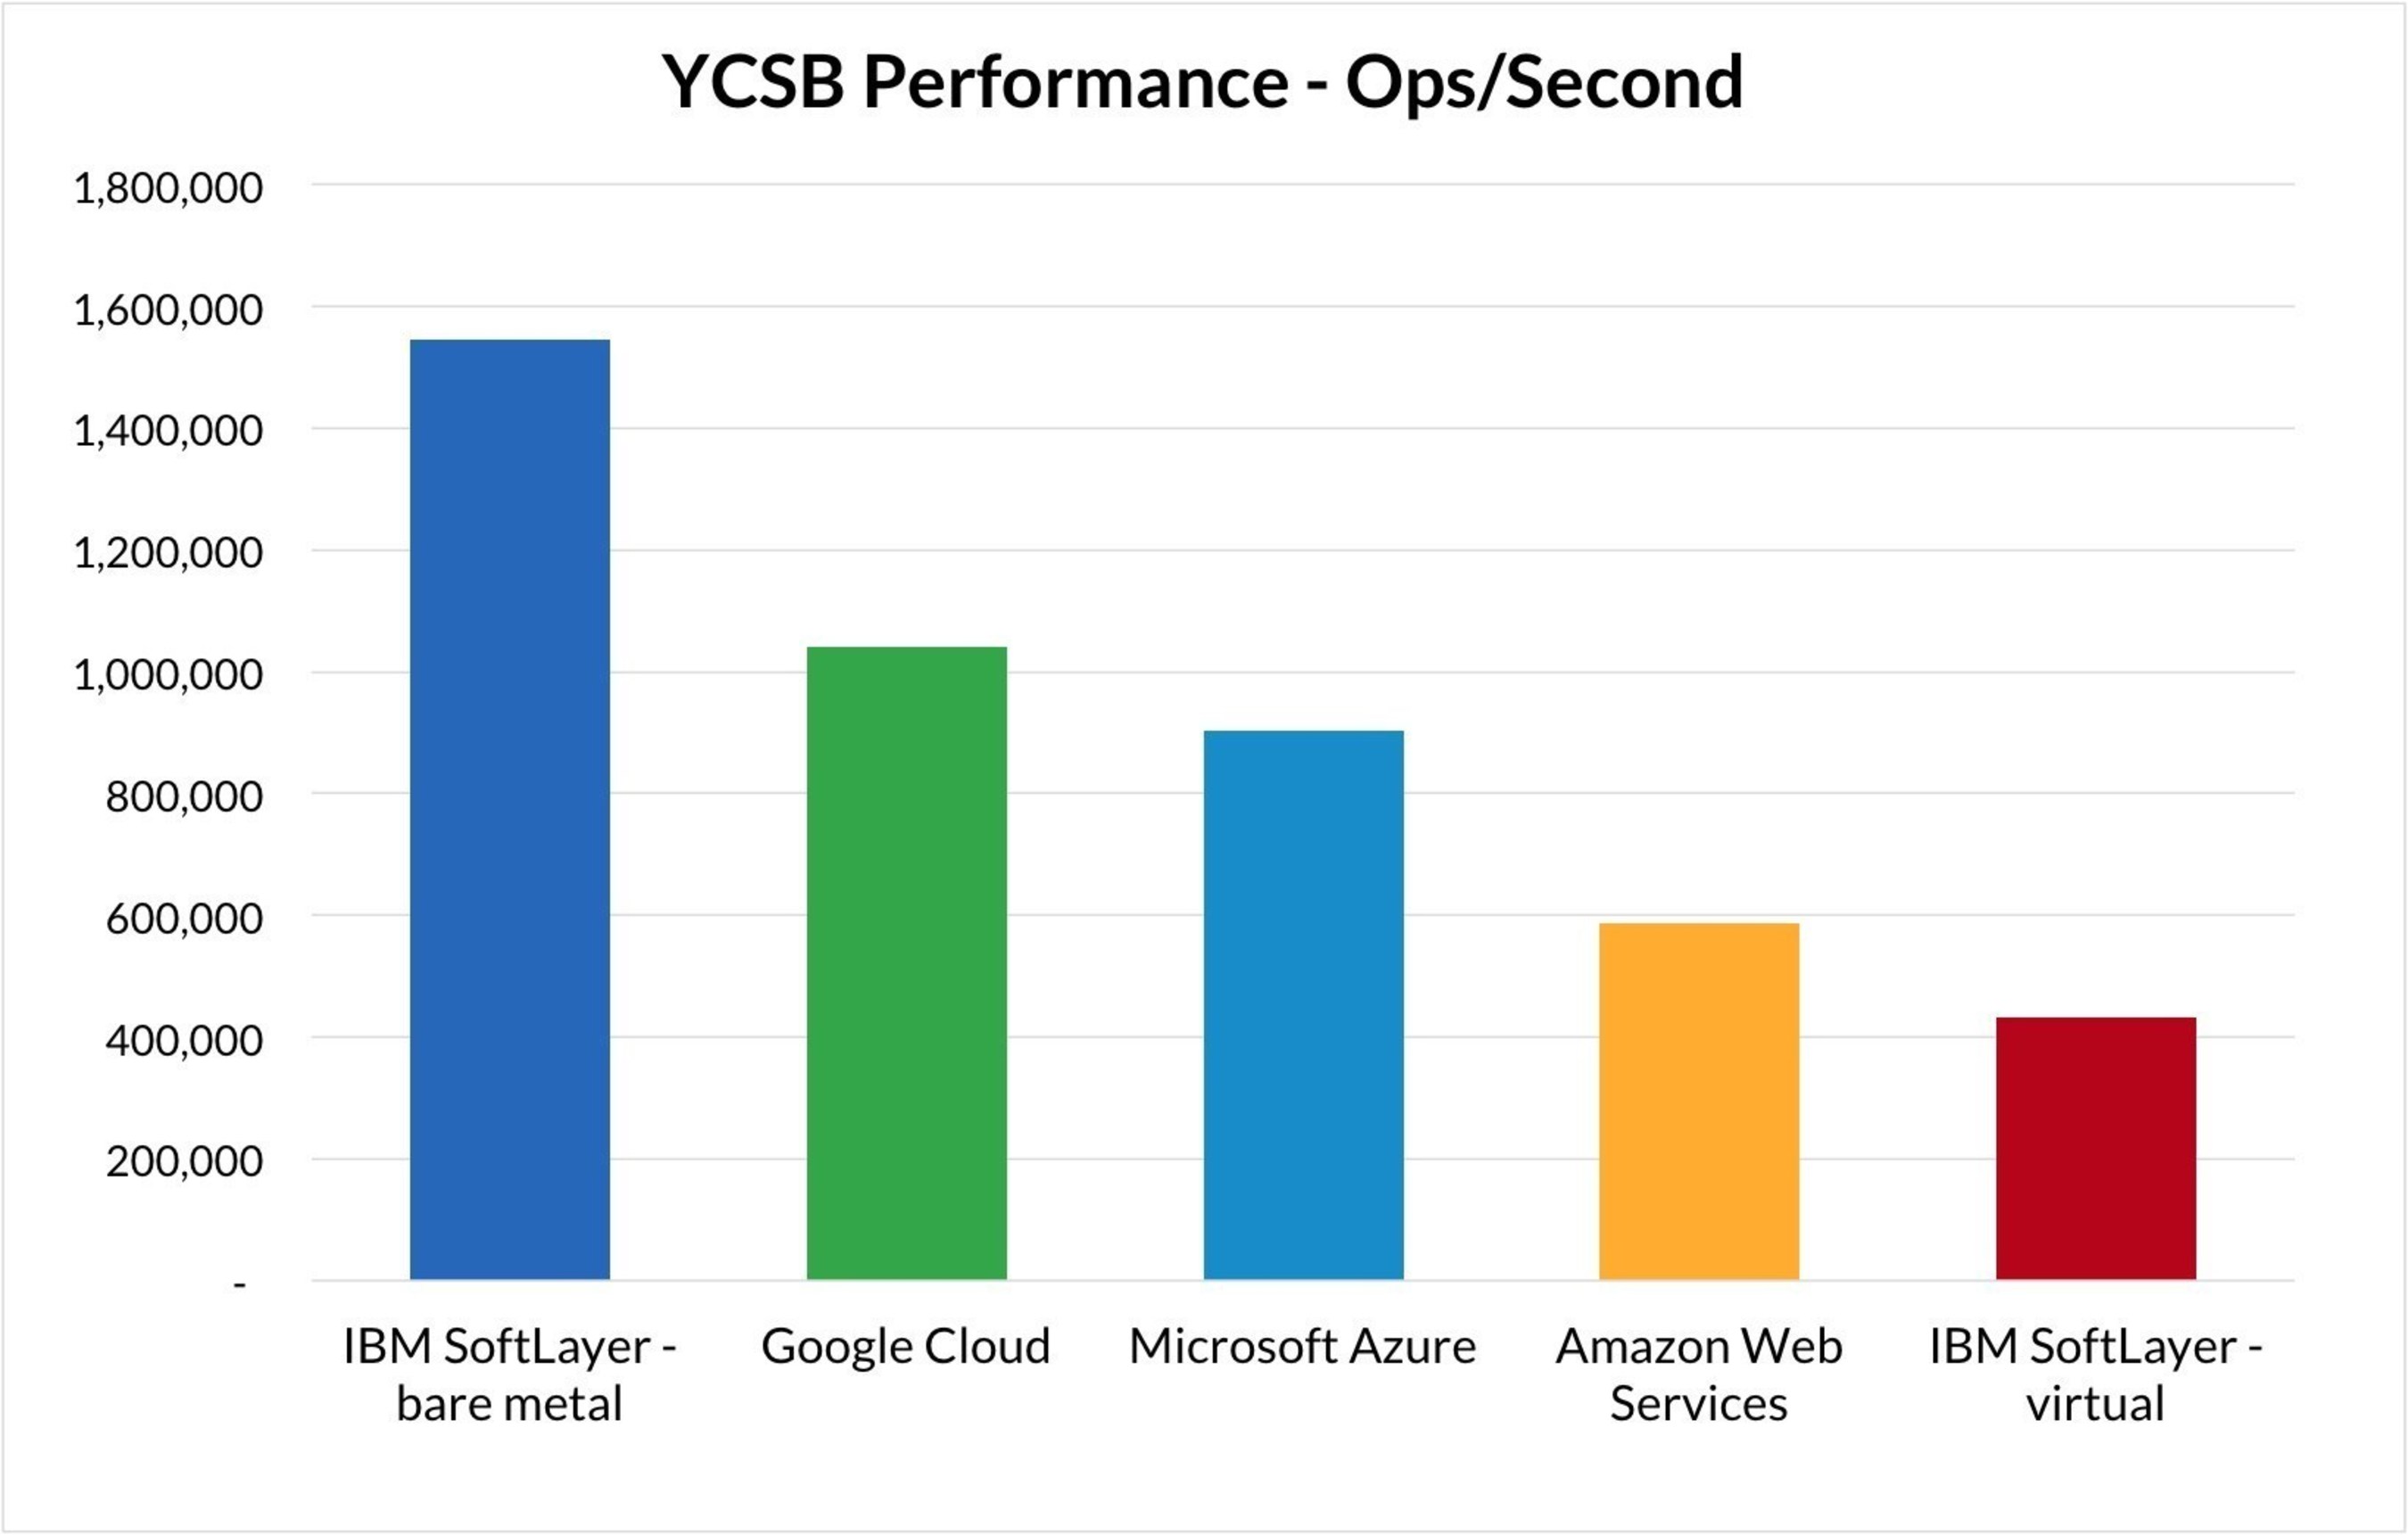 YCSB Performance - Ops/Second